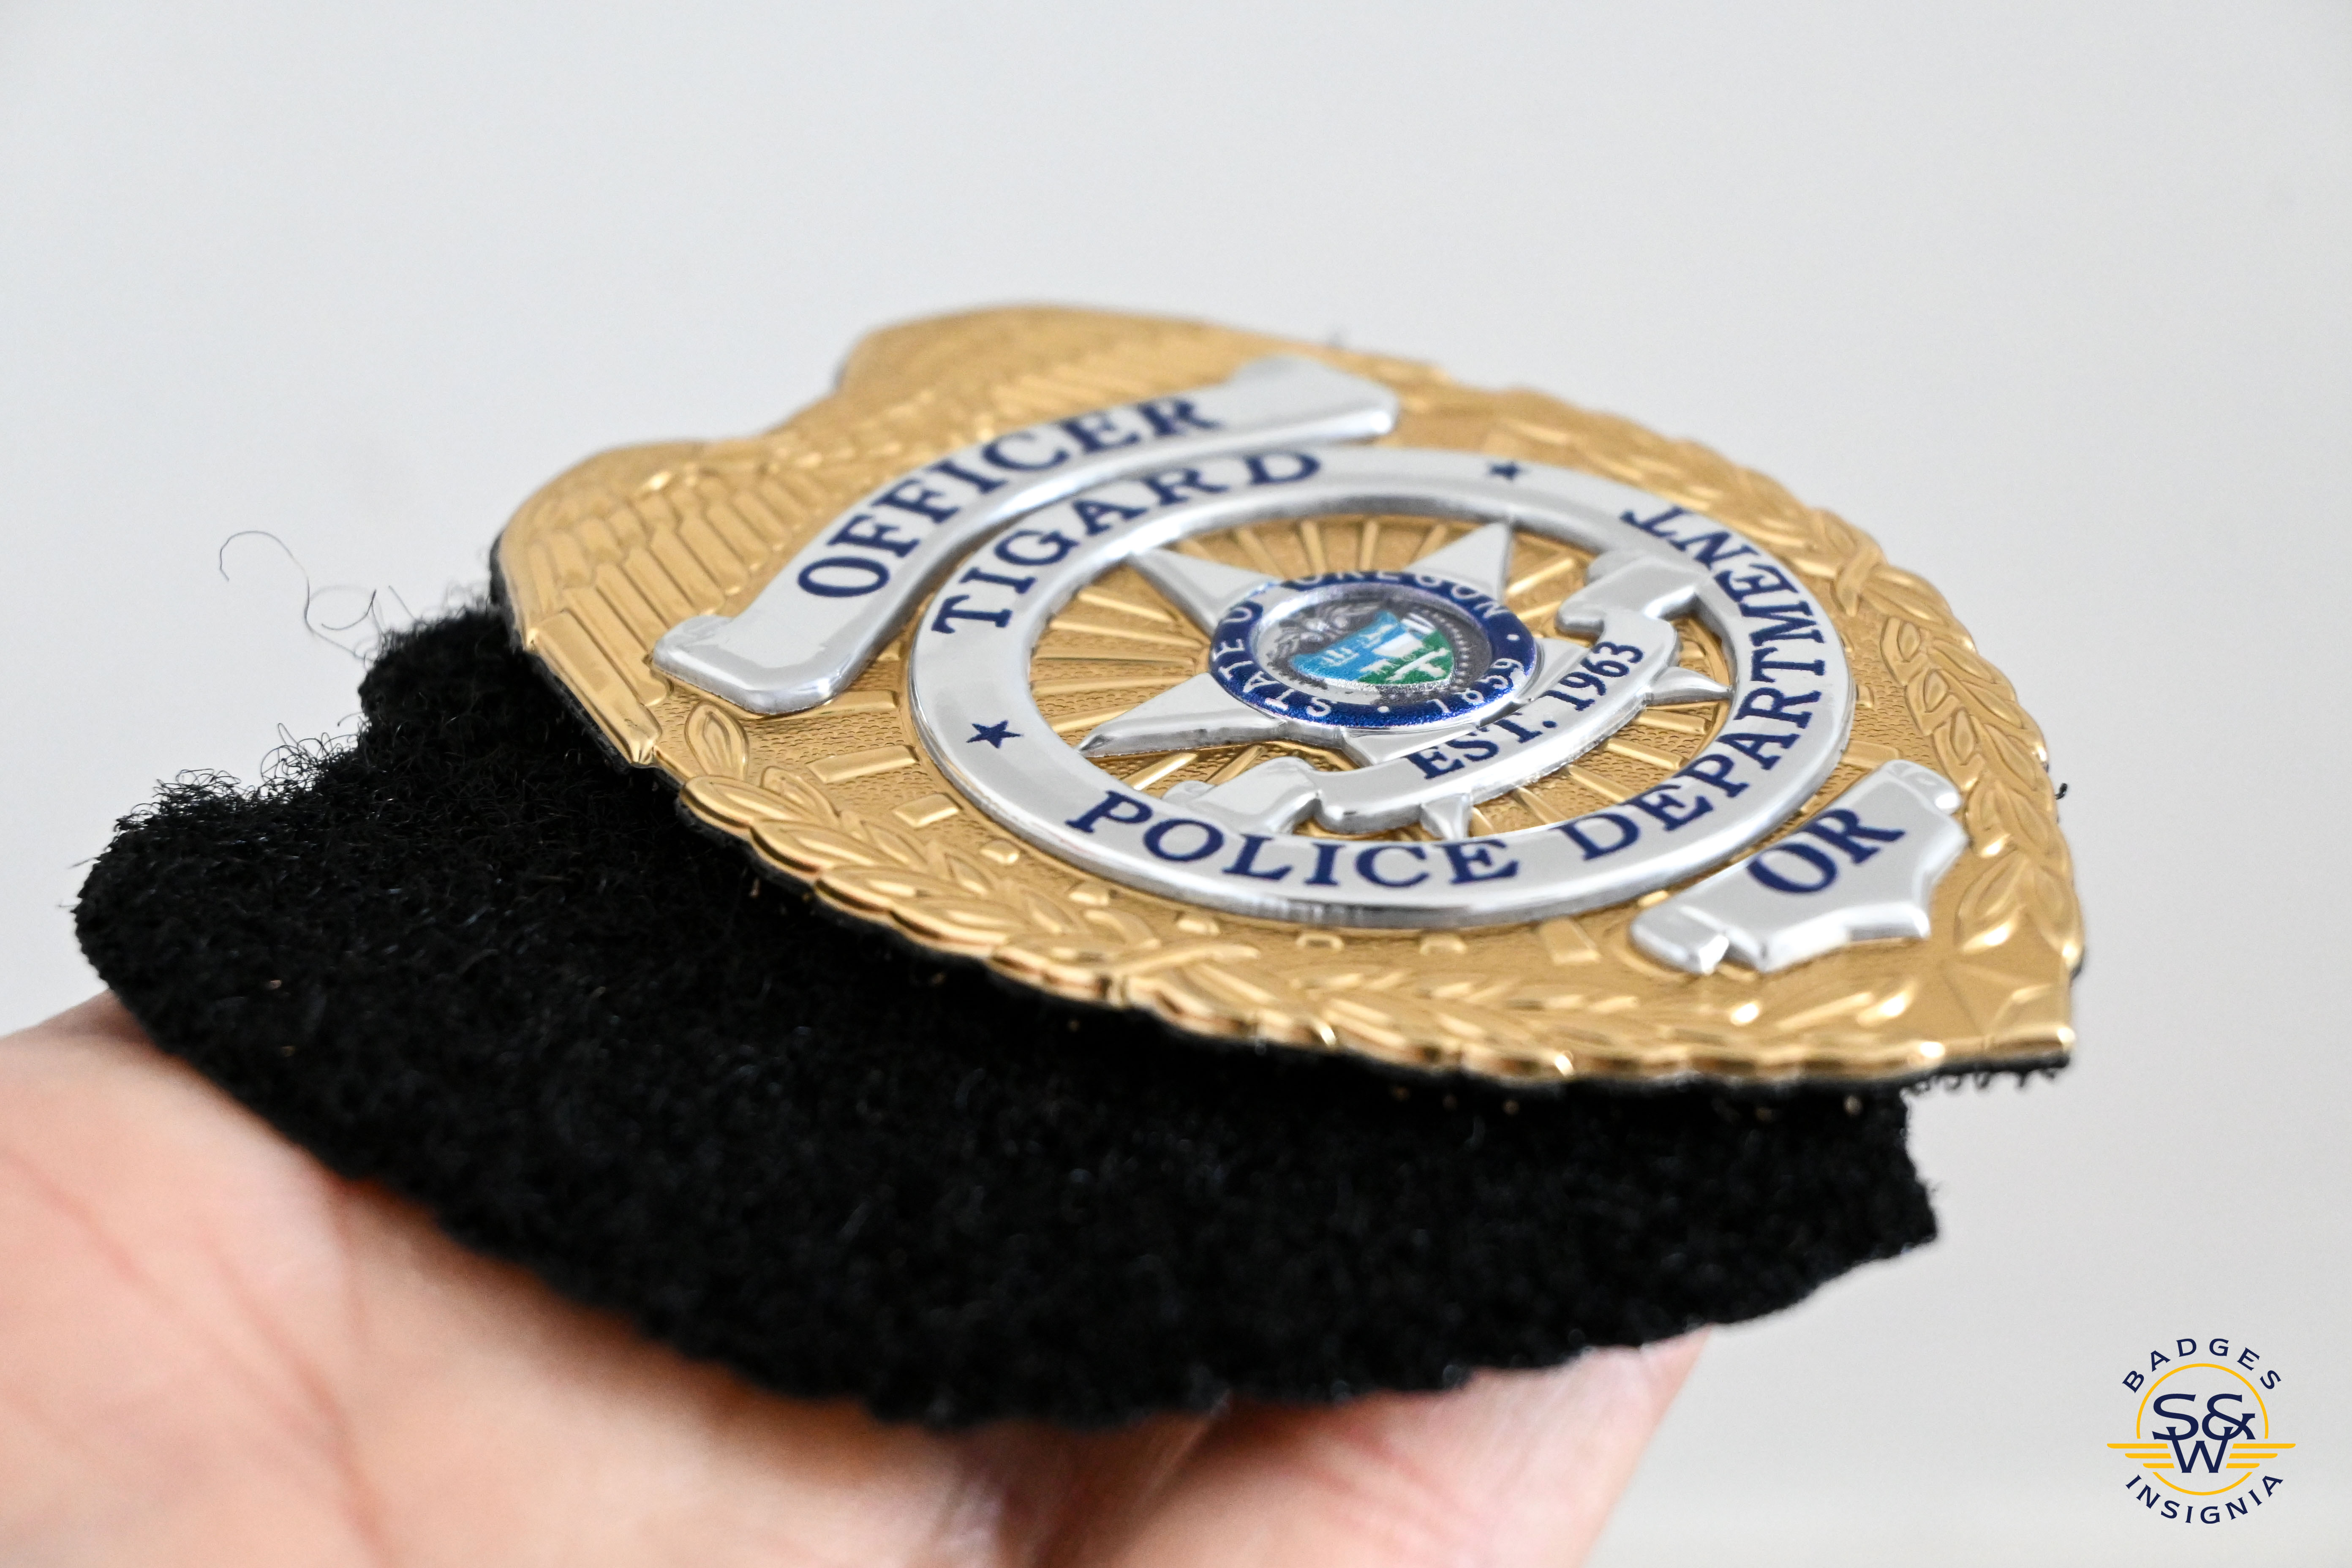 A Flexbadge being held showing detail and hook and loop backing.